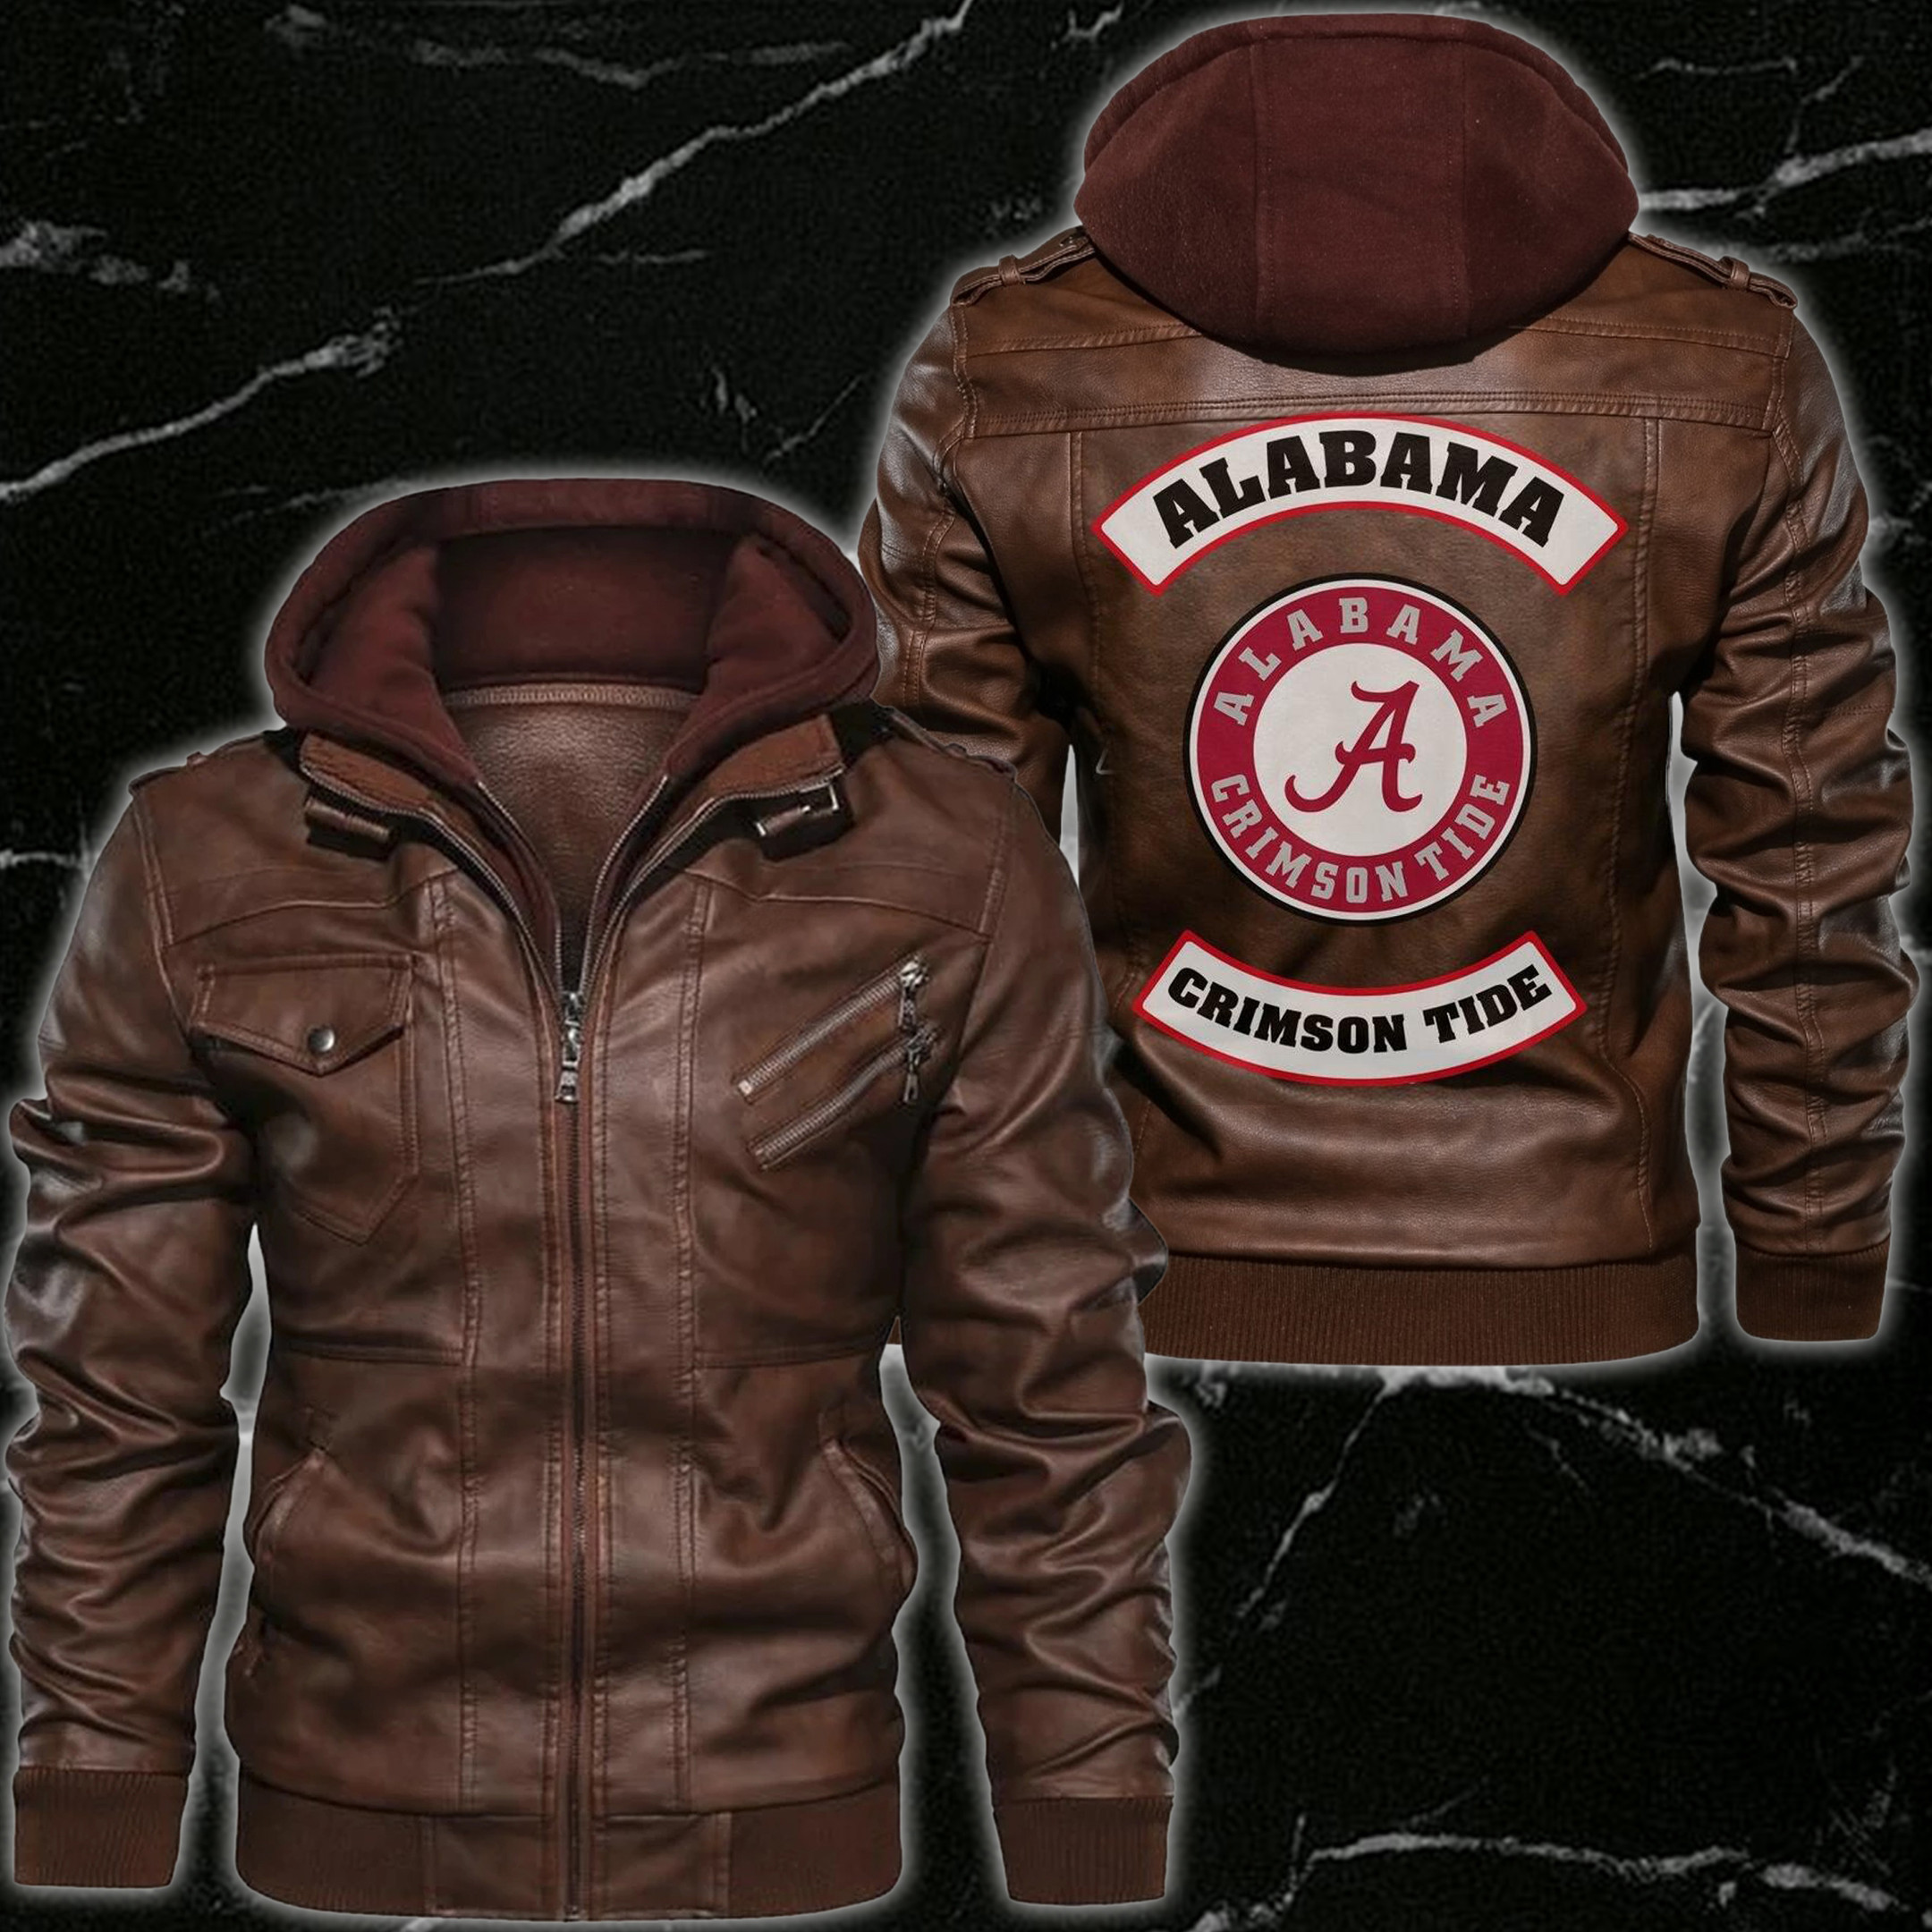 These Amazing Leather Jacket will add to the appeal of your outfit 65